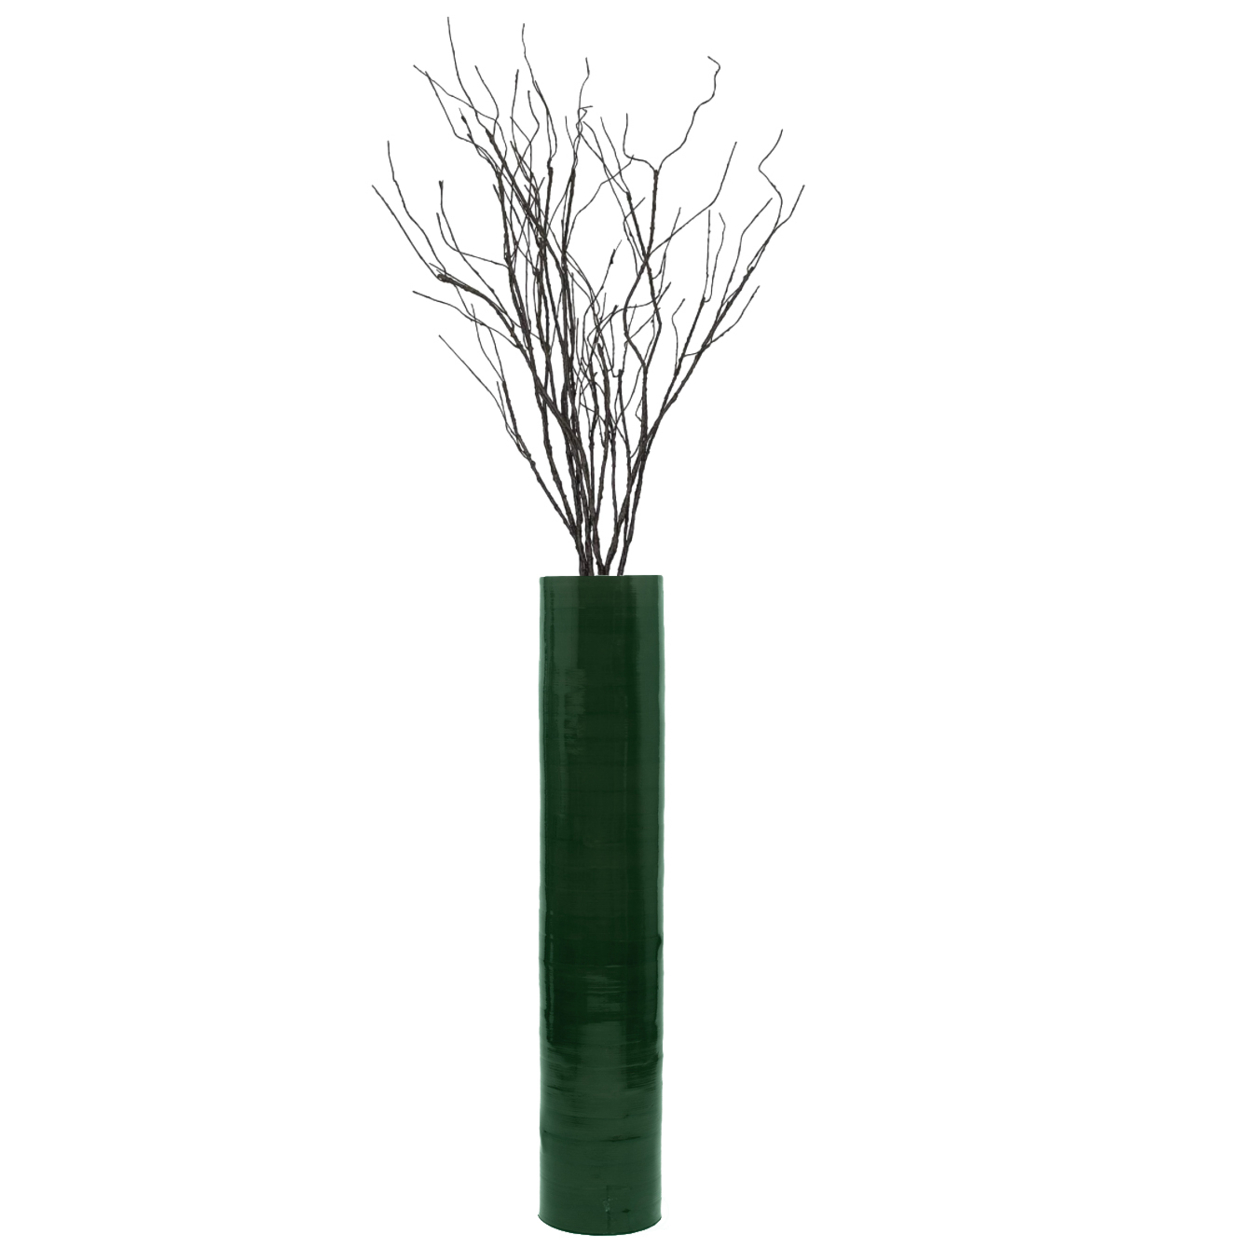 Tall Decorative Contemporary Bamboo Display Floor Vase Cylinder Shape, 30 Inch - Green